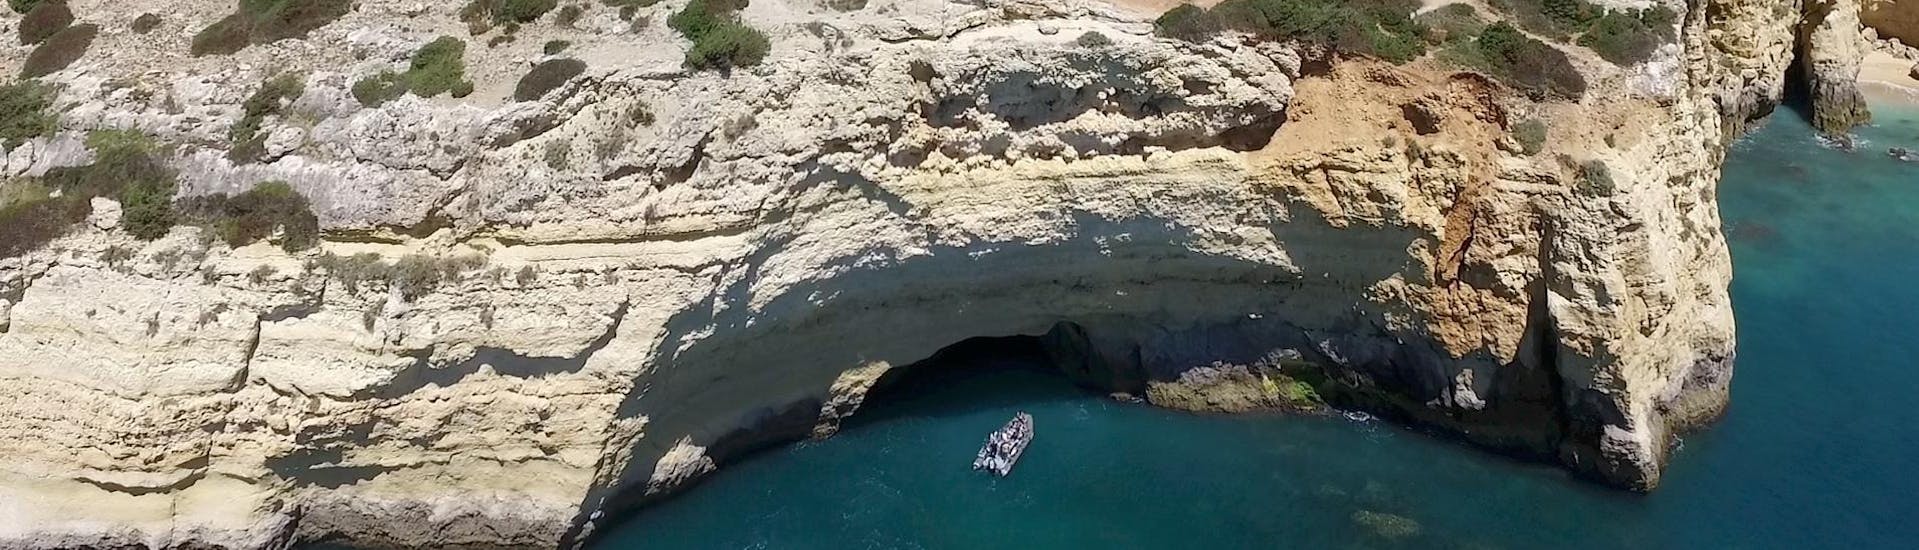 During a boat trip from Portimao to the caves of Benagil with Seadventure Boat Trips, a boat is cruising along the coast of Portimao.